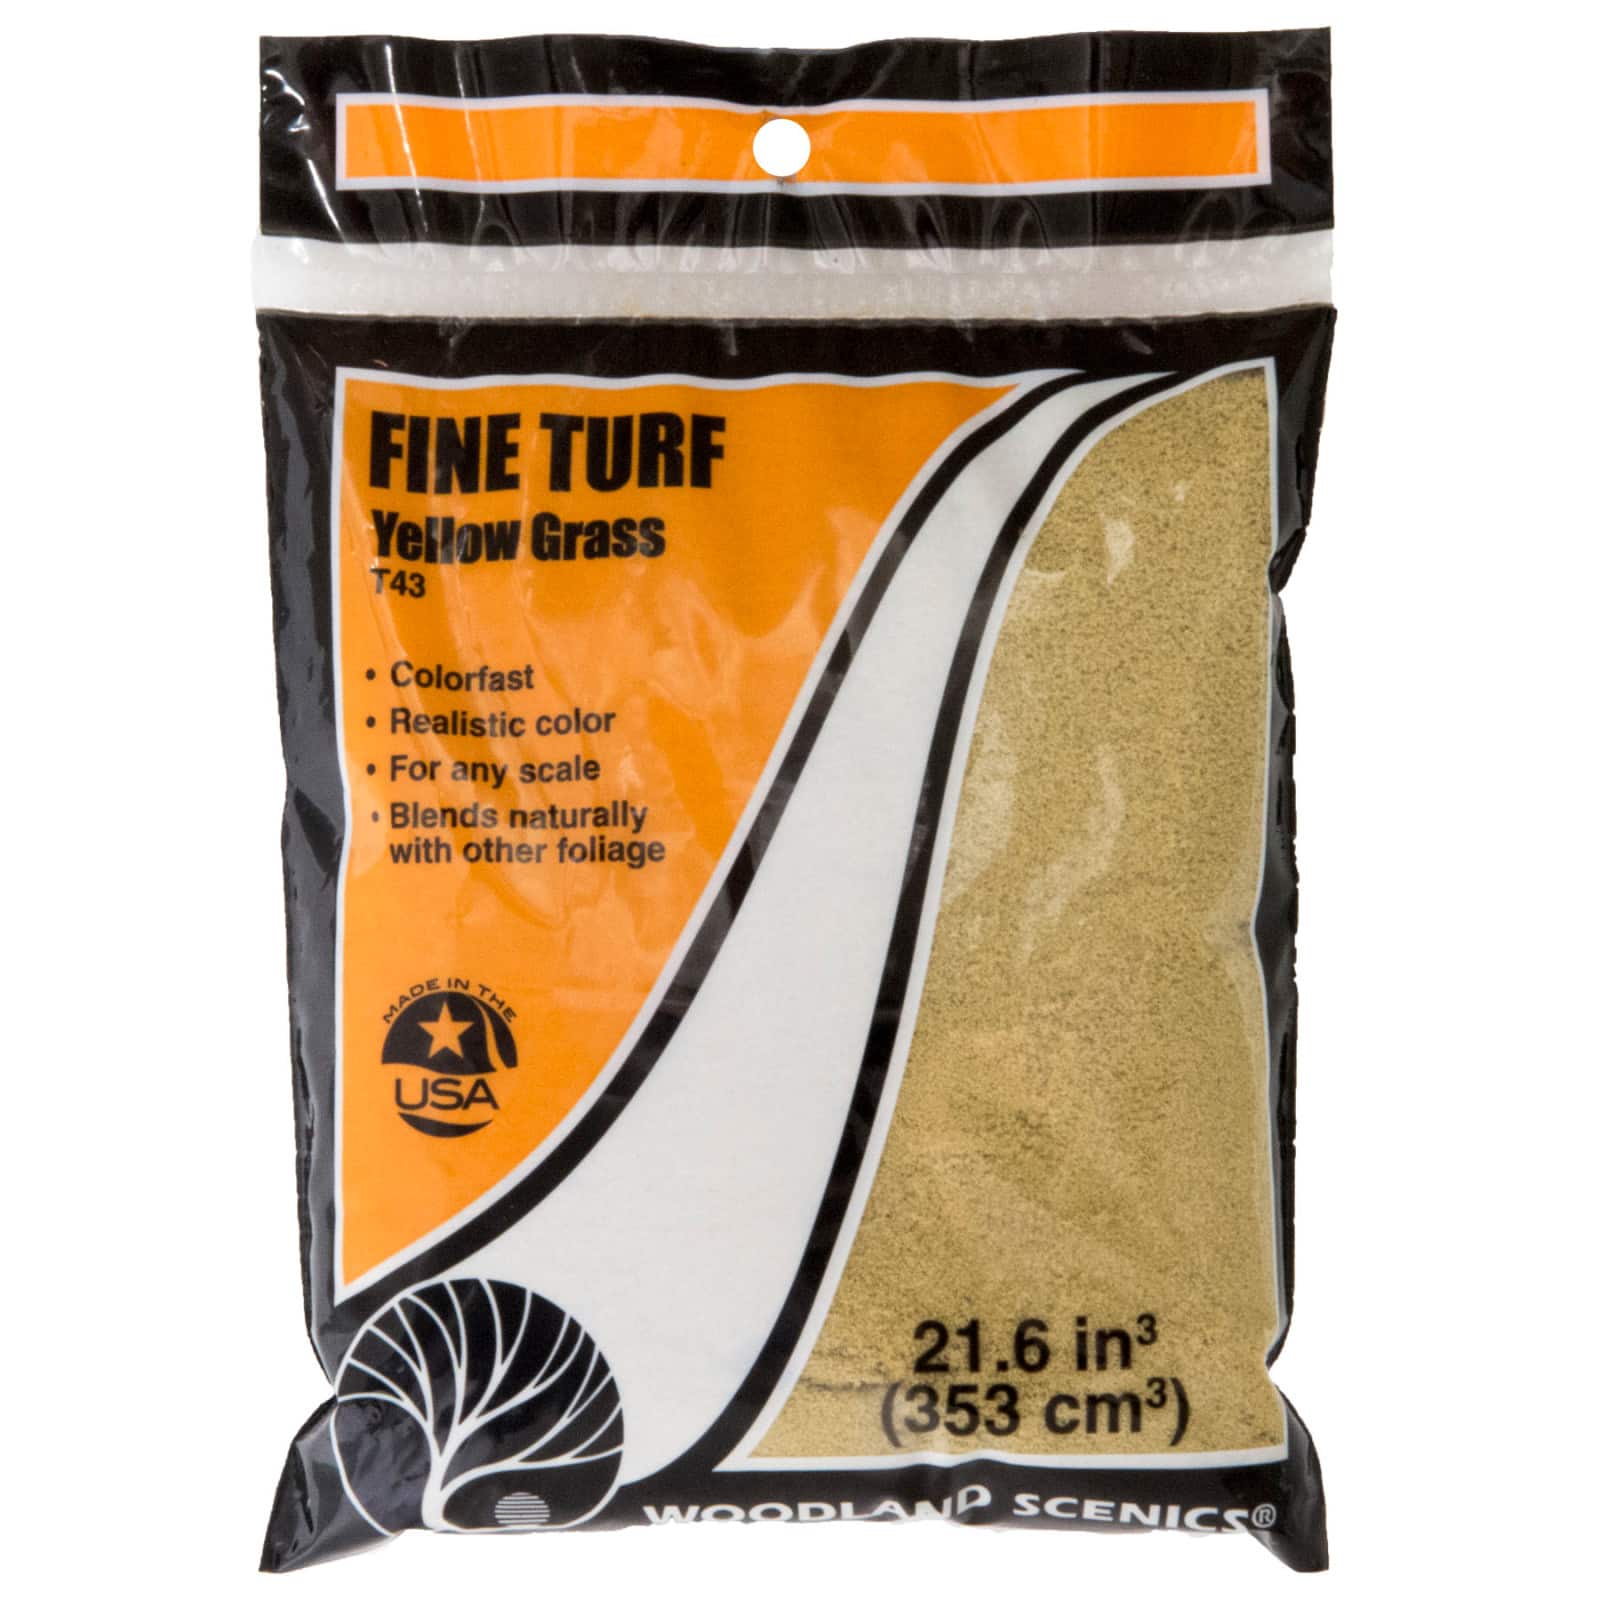 Woodland Scenics Woo Fine Turf Blended Earth 30 Oz T50 Woot50 for sale online 